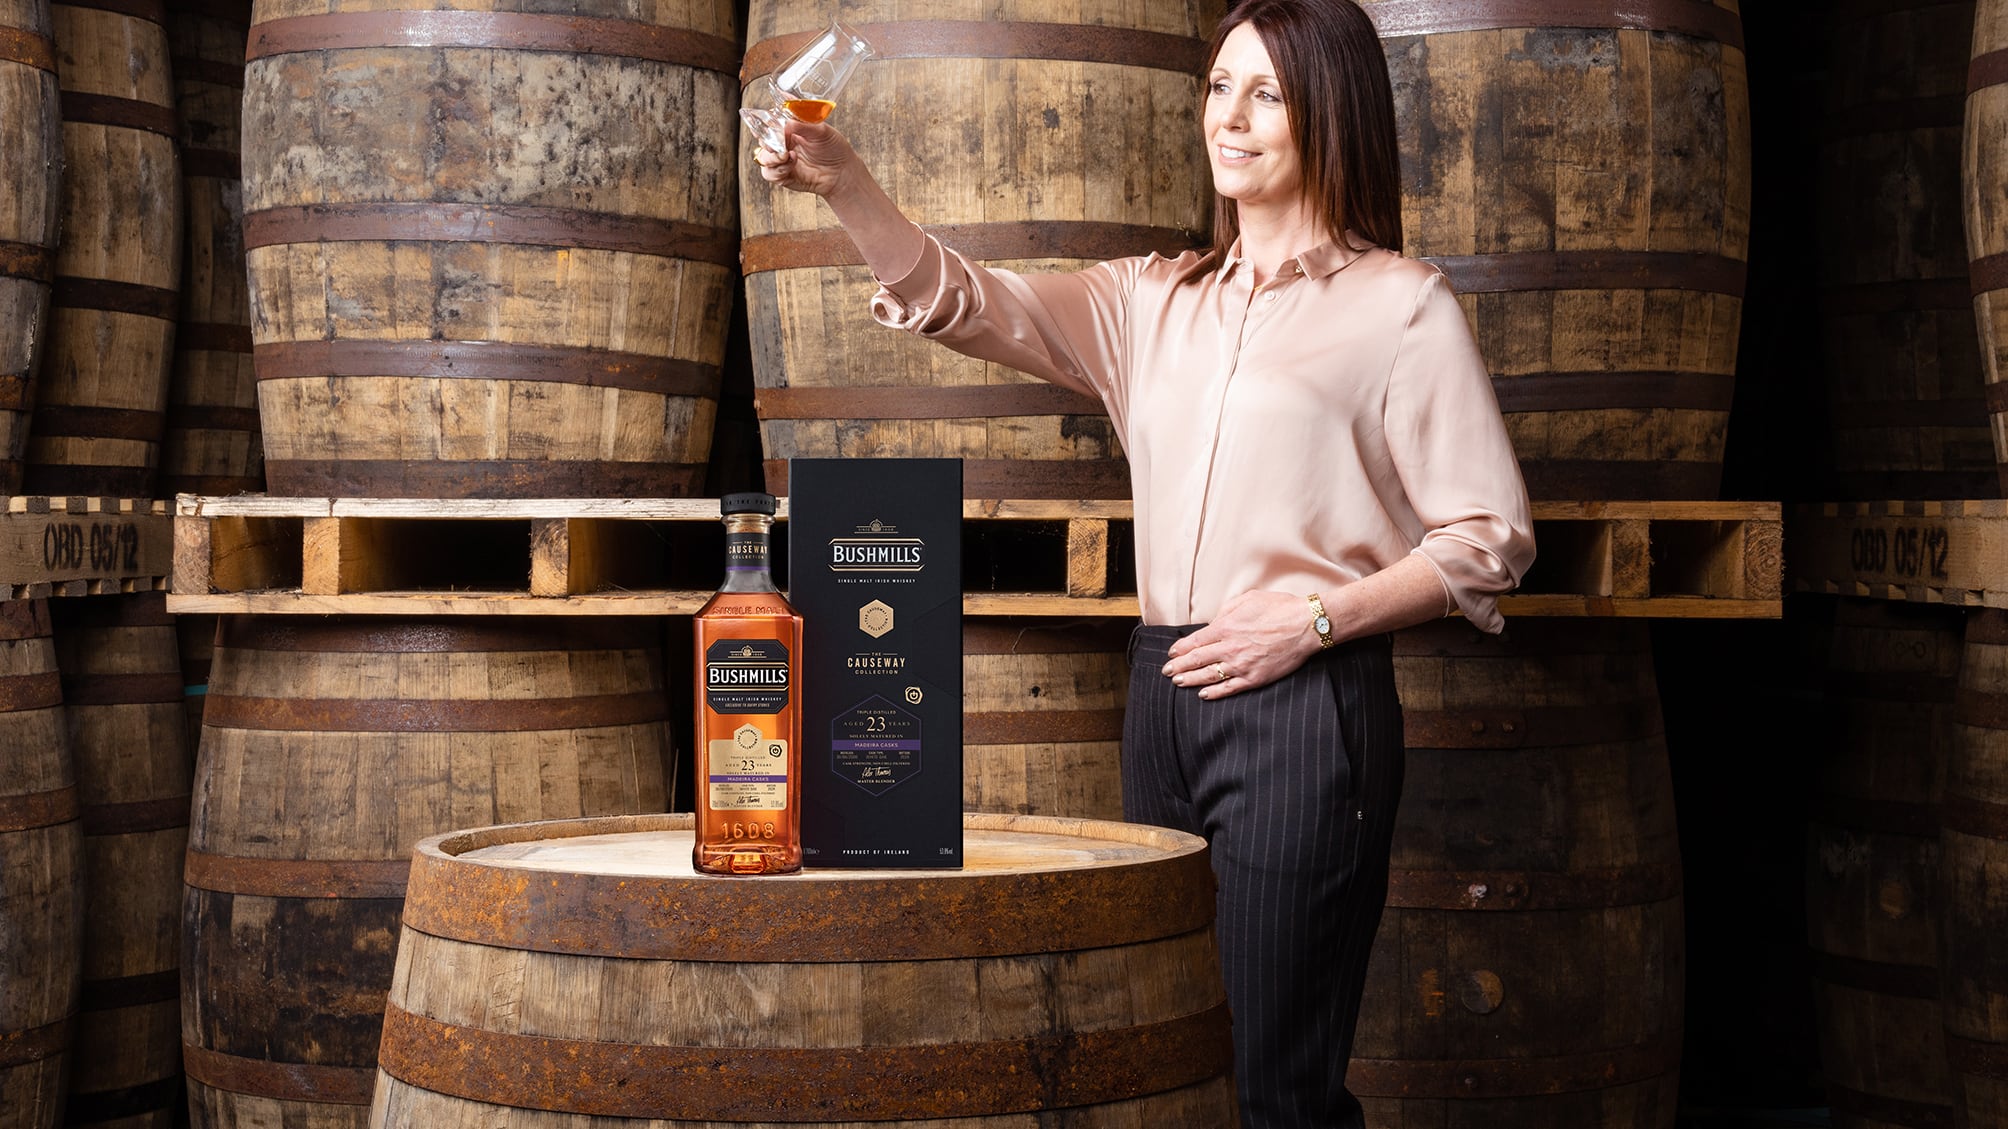 Bushmills’ master blender Alex Thomas with the latest Causeway Collection release, a 23-Year-Old Madeira Cask single malt Irish whiskey.